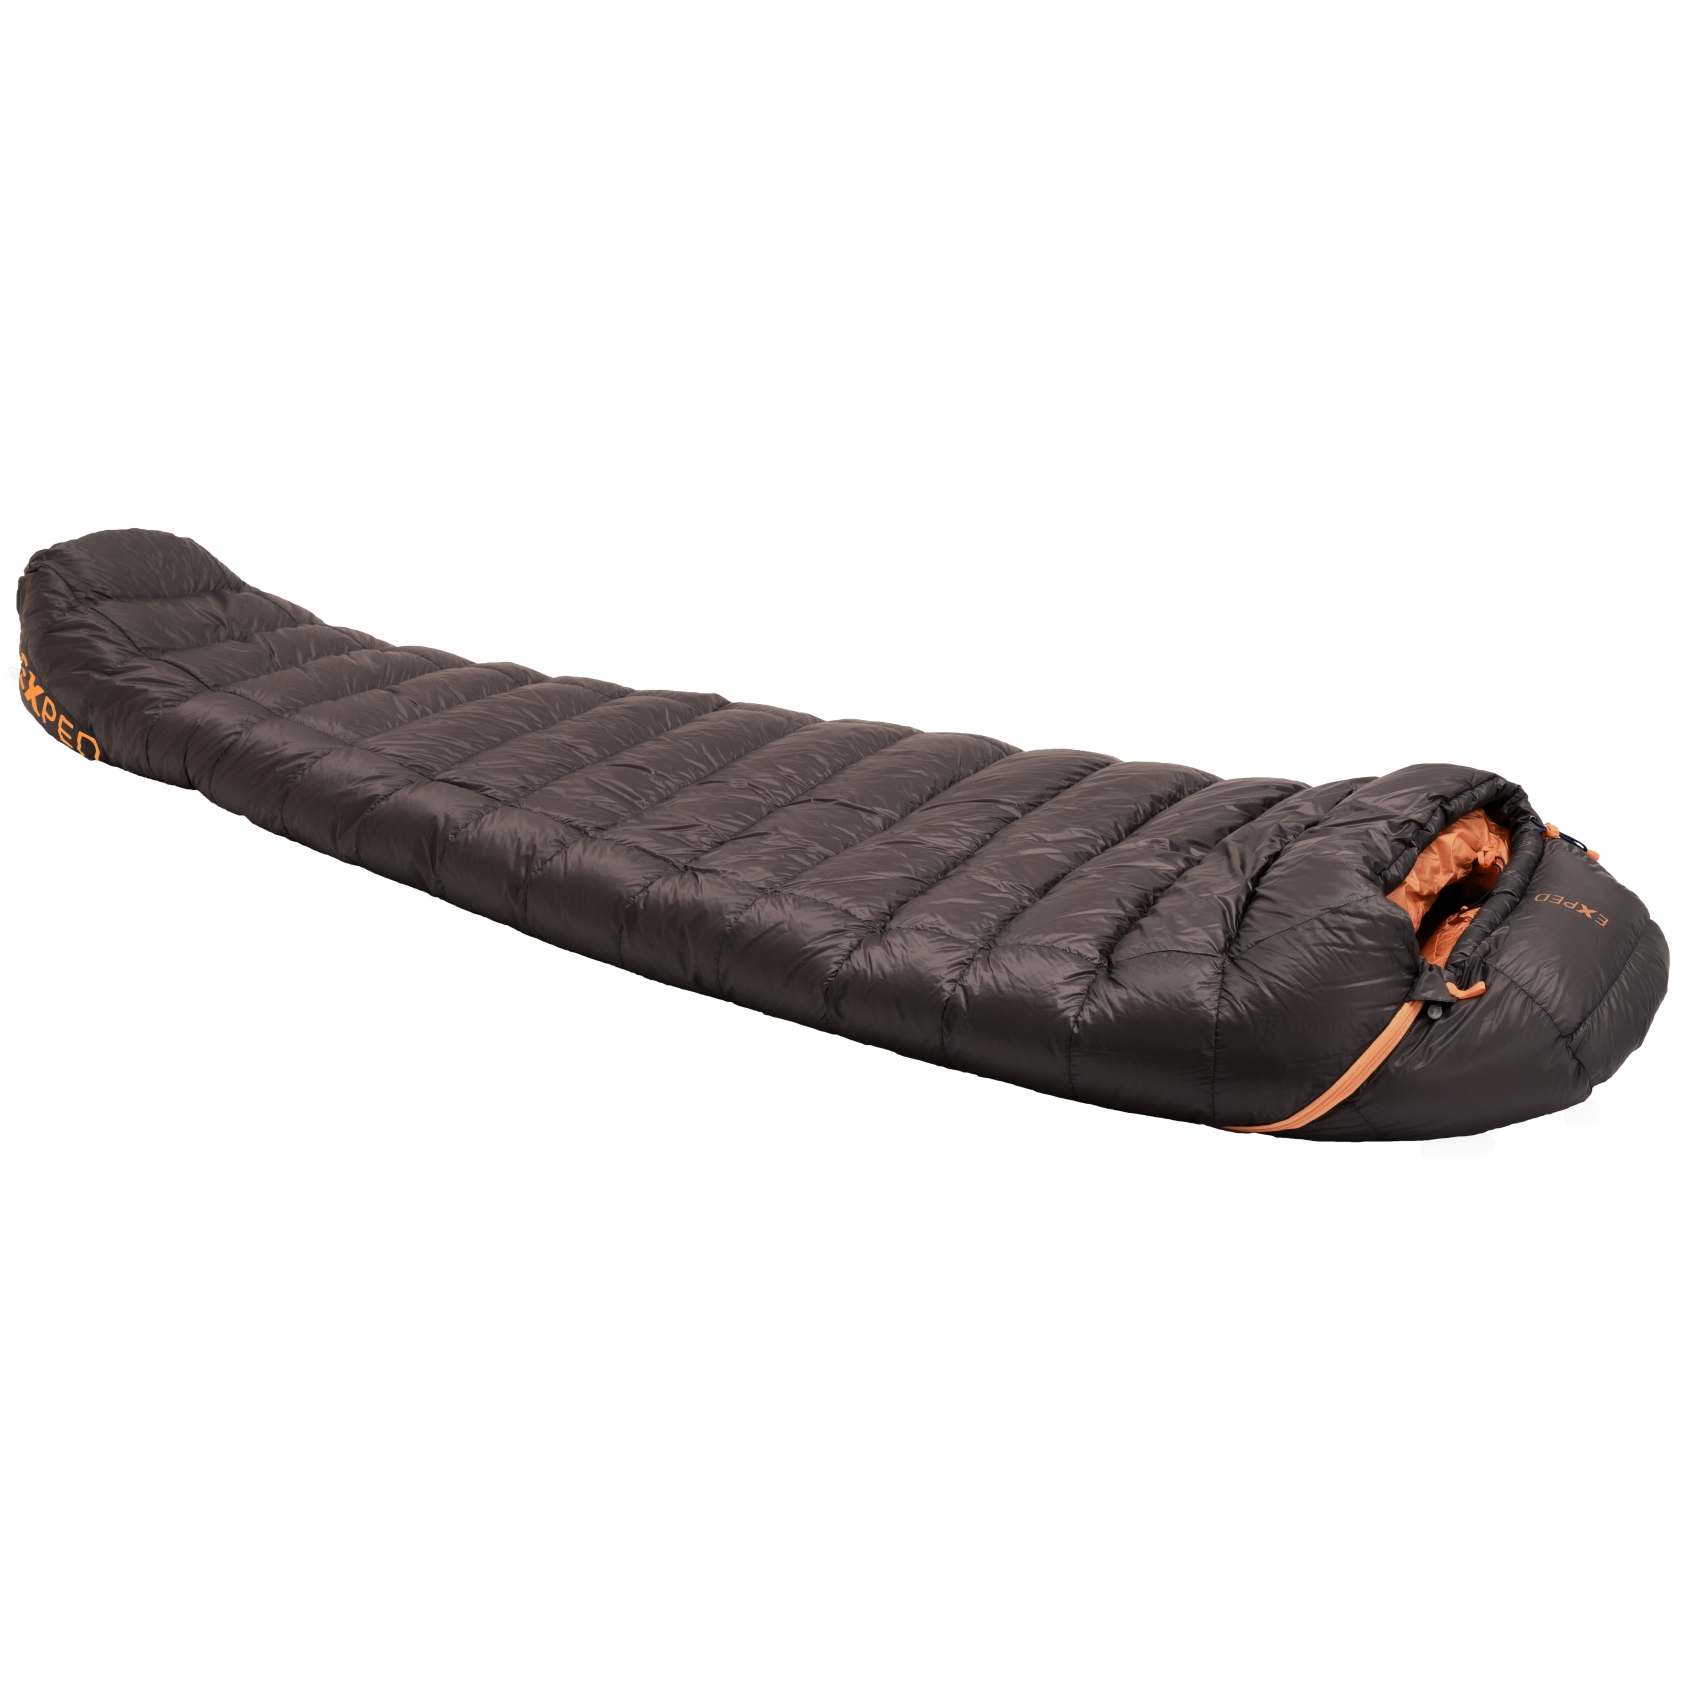 EXPED | Waterproof Compression Bag - Motorcycle Camping Gear